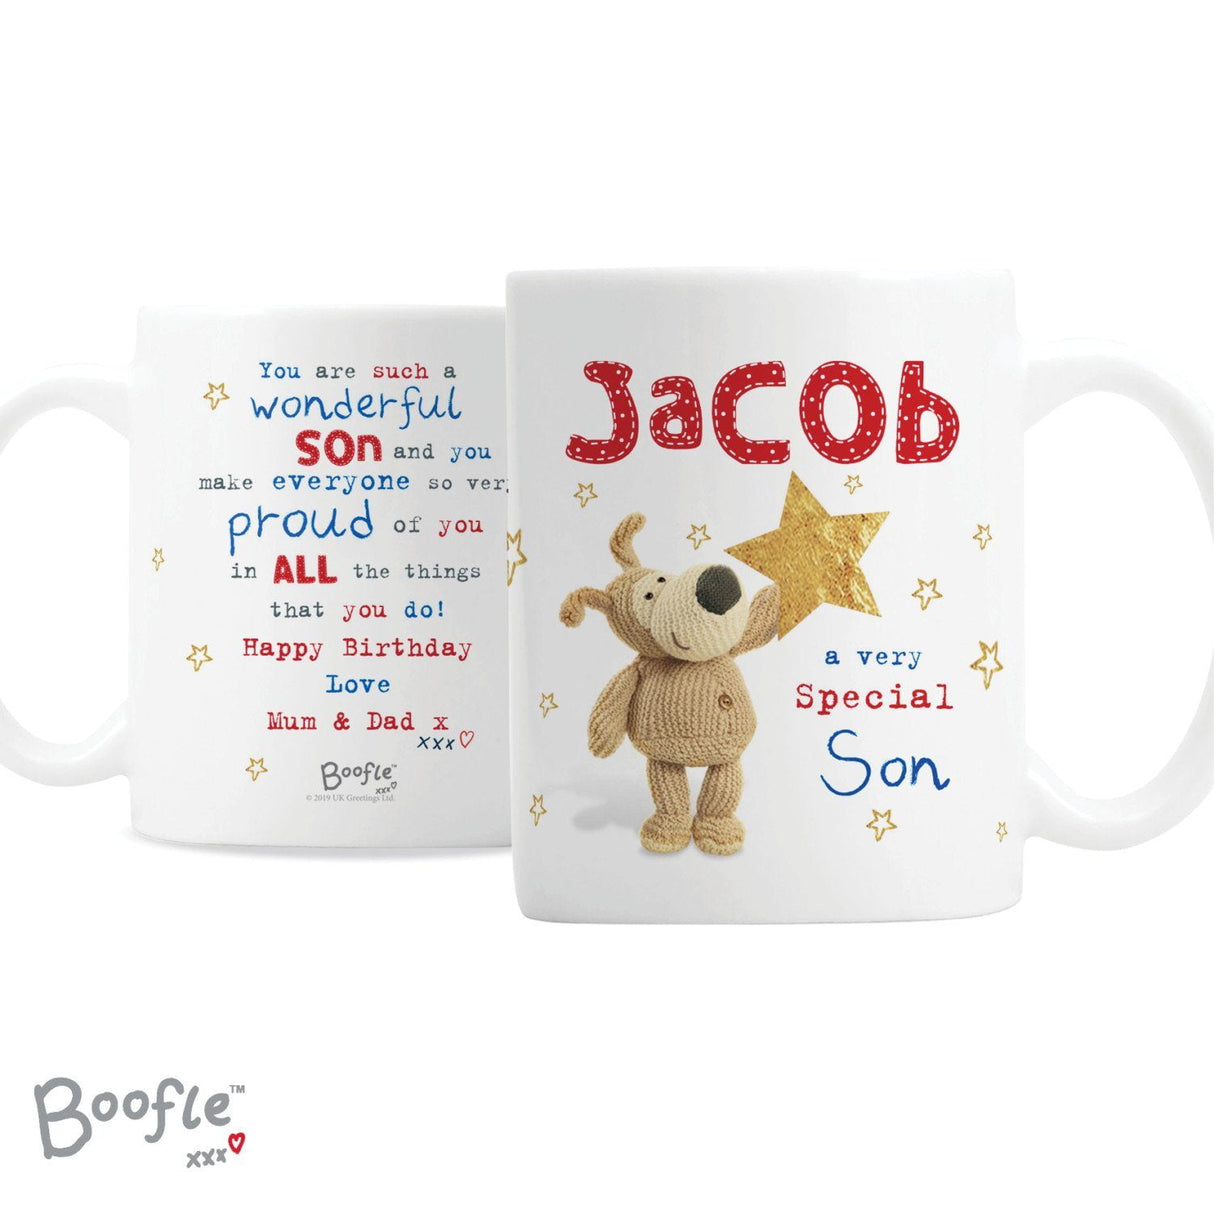 Boofle Very Special Star Mug - Gift Moments